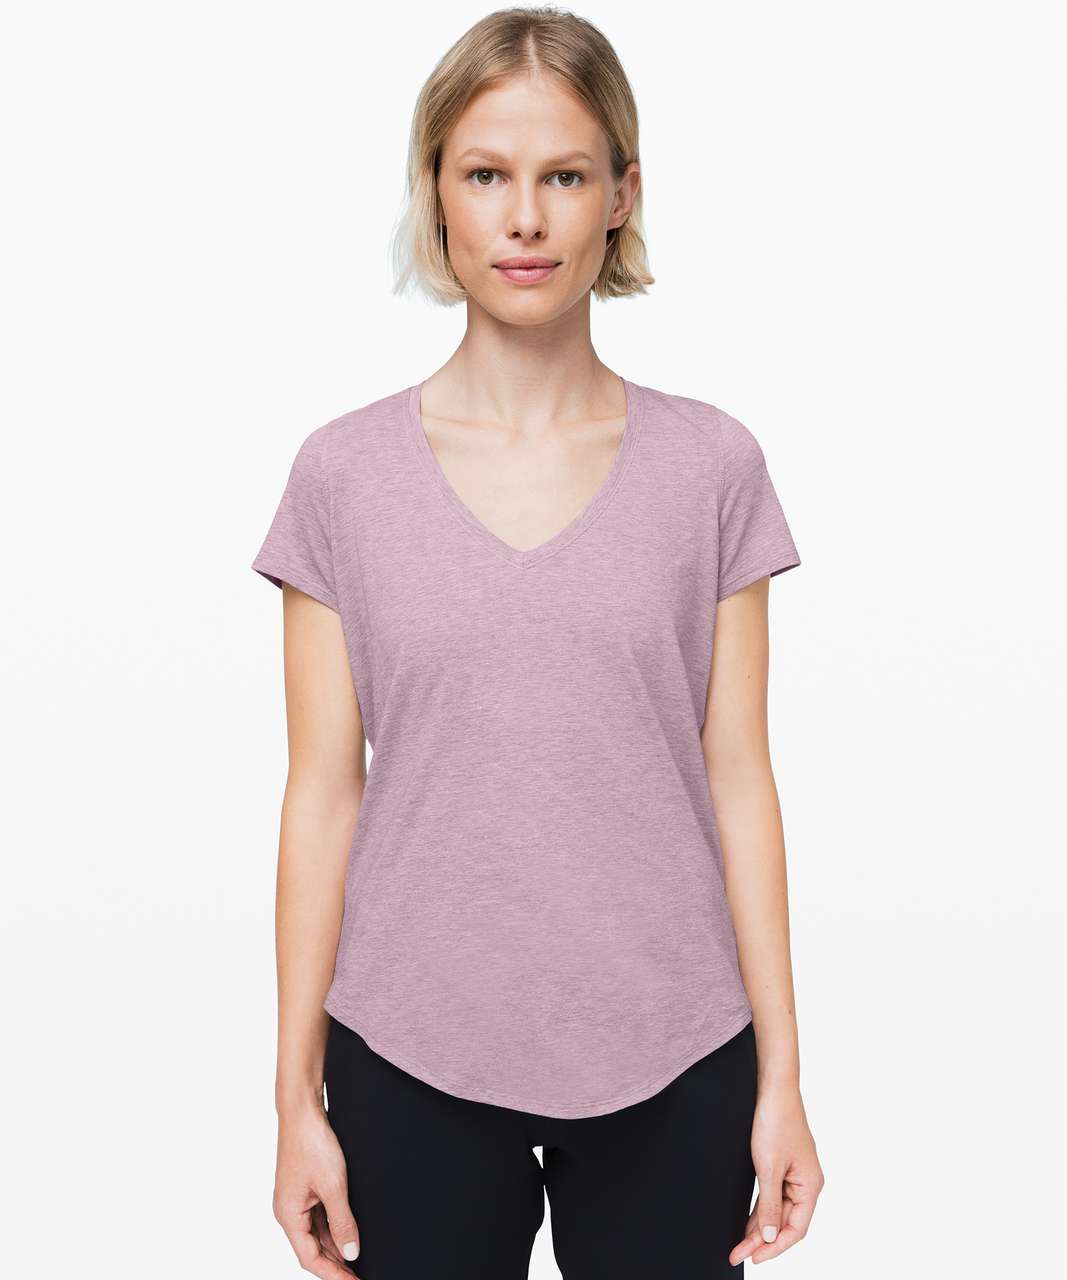 Lululemon Love Tee V - Heathered Frosted Mulberry